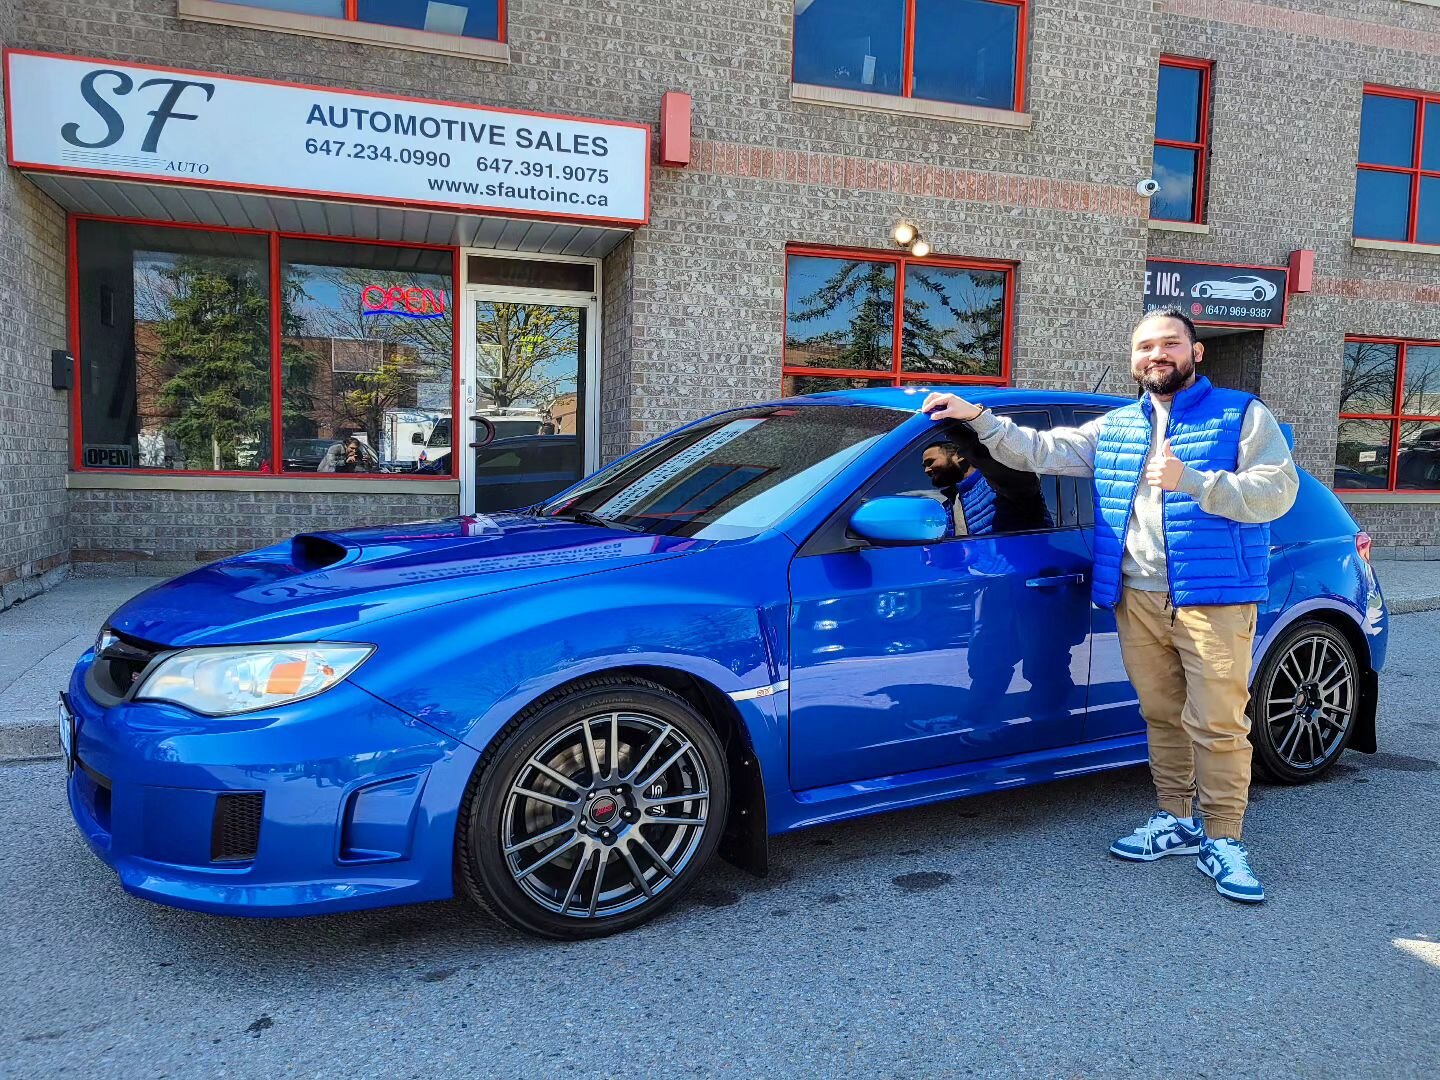 Congratulations Earl on your new rare 2014 STI Hatchback 🏁 Thank you for trusting in SF Auto and welcome to our Family 💪🏁
.
.
.
.
.
.
.
.
.
.
.
.
.
.
.
.
.
.
#sfauto #justdrive #subaru #sti #stiwrx #sti6speed #hatchback #stihatch #stihatchback #wr